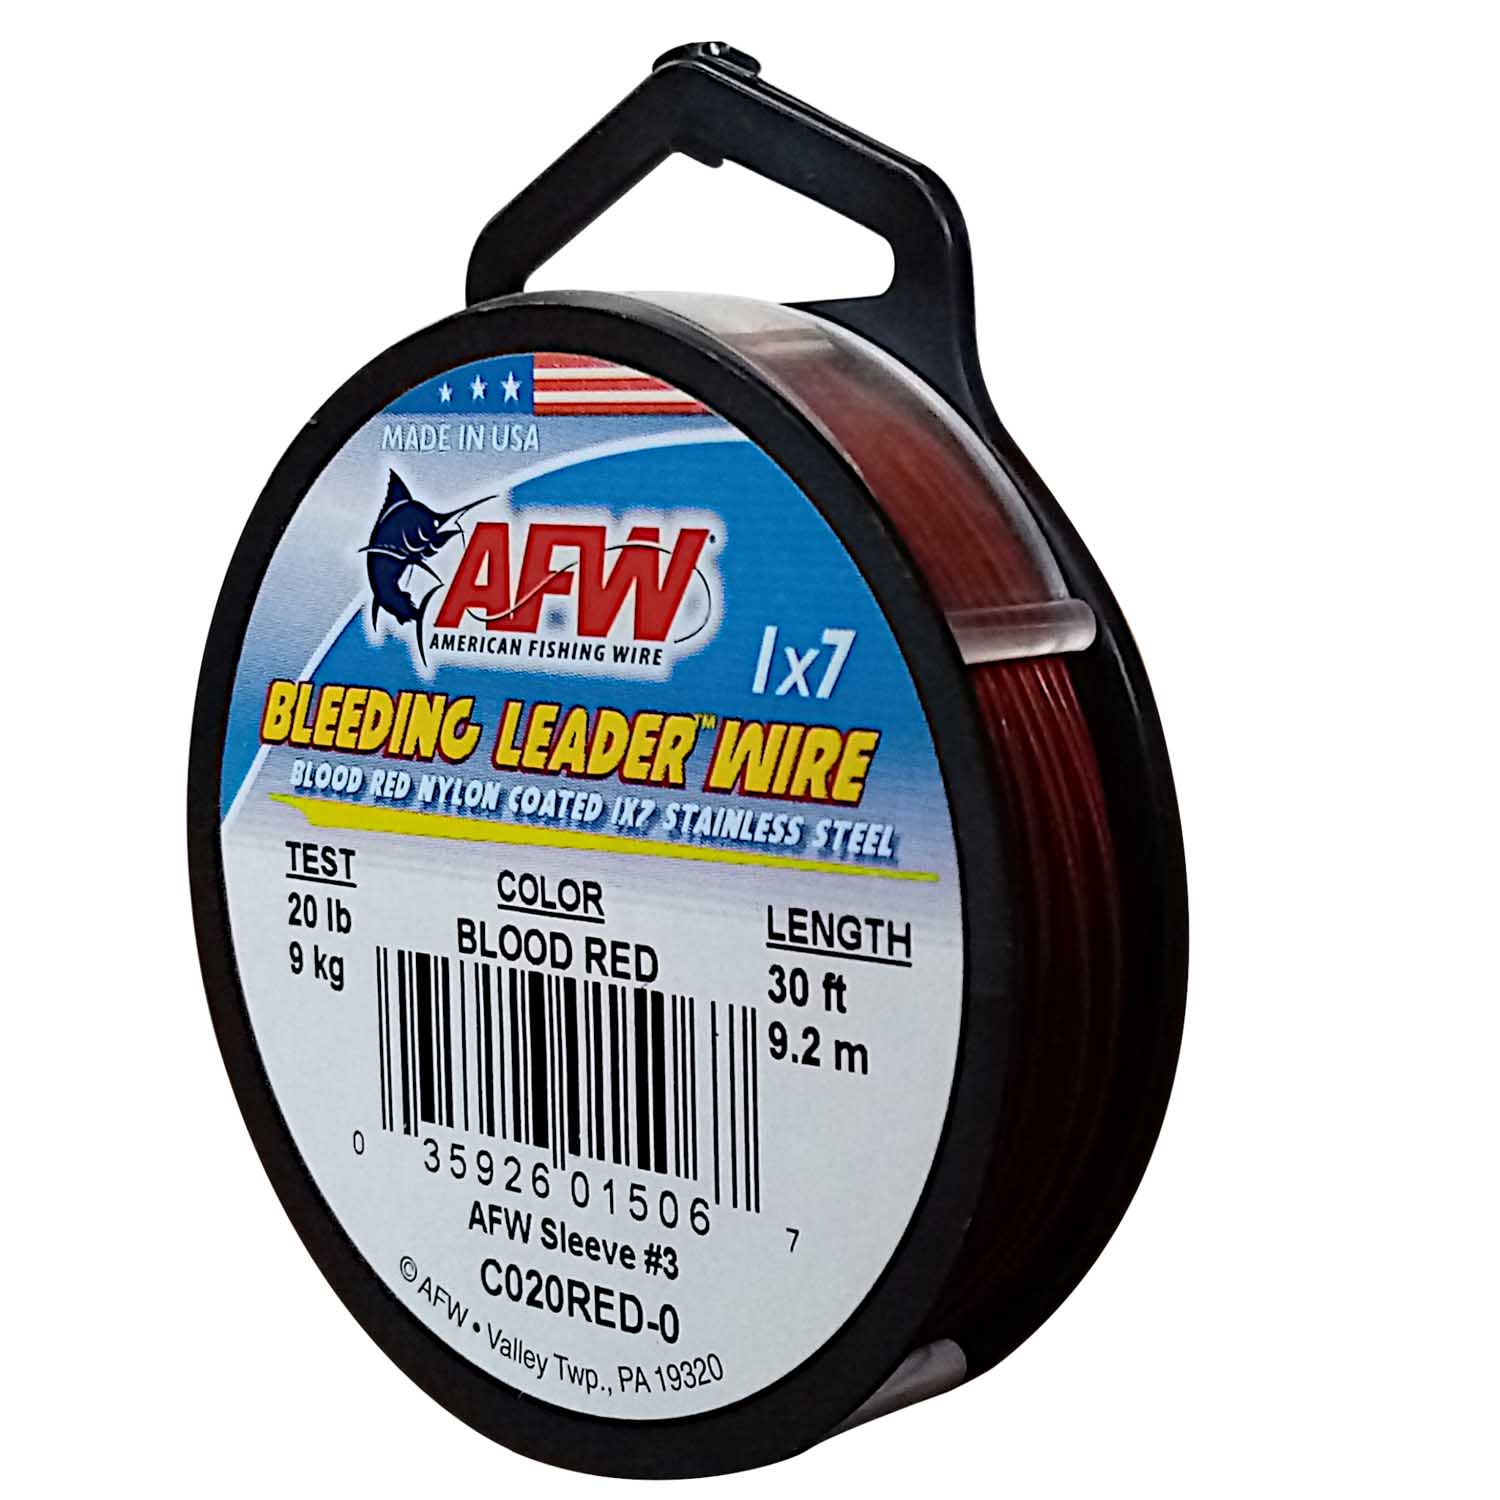 American Fishing Wire Bleeding Red Leader Wire 9Kg/20Lb - Showspace